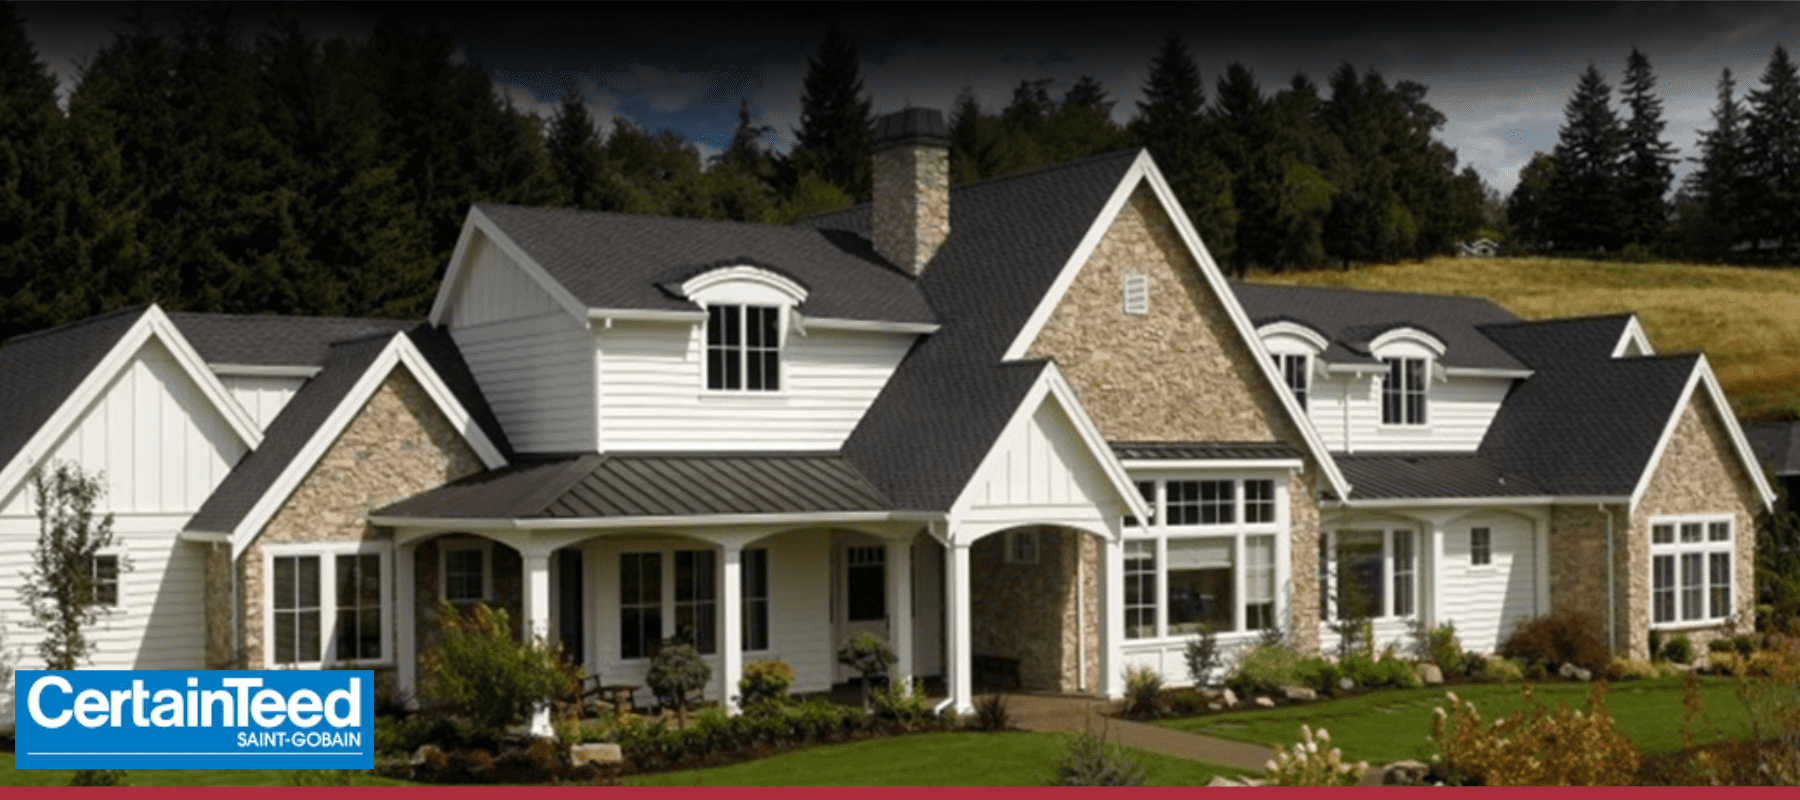 Certainteed Shingles and Roofing Available Locally at Gilford Home Center